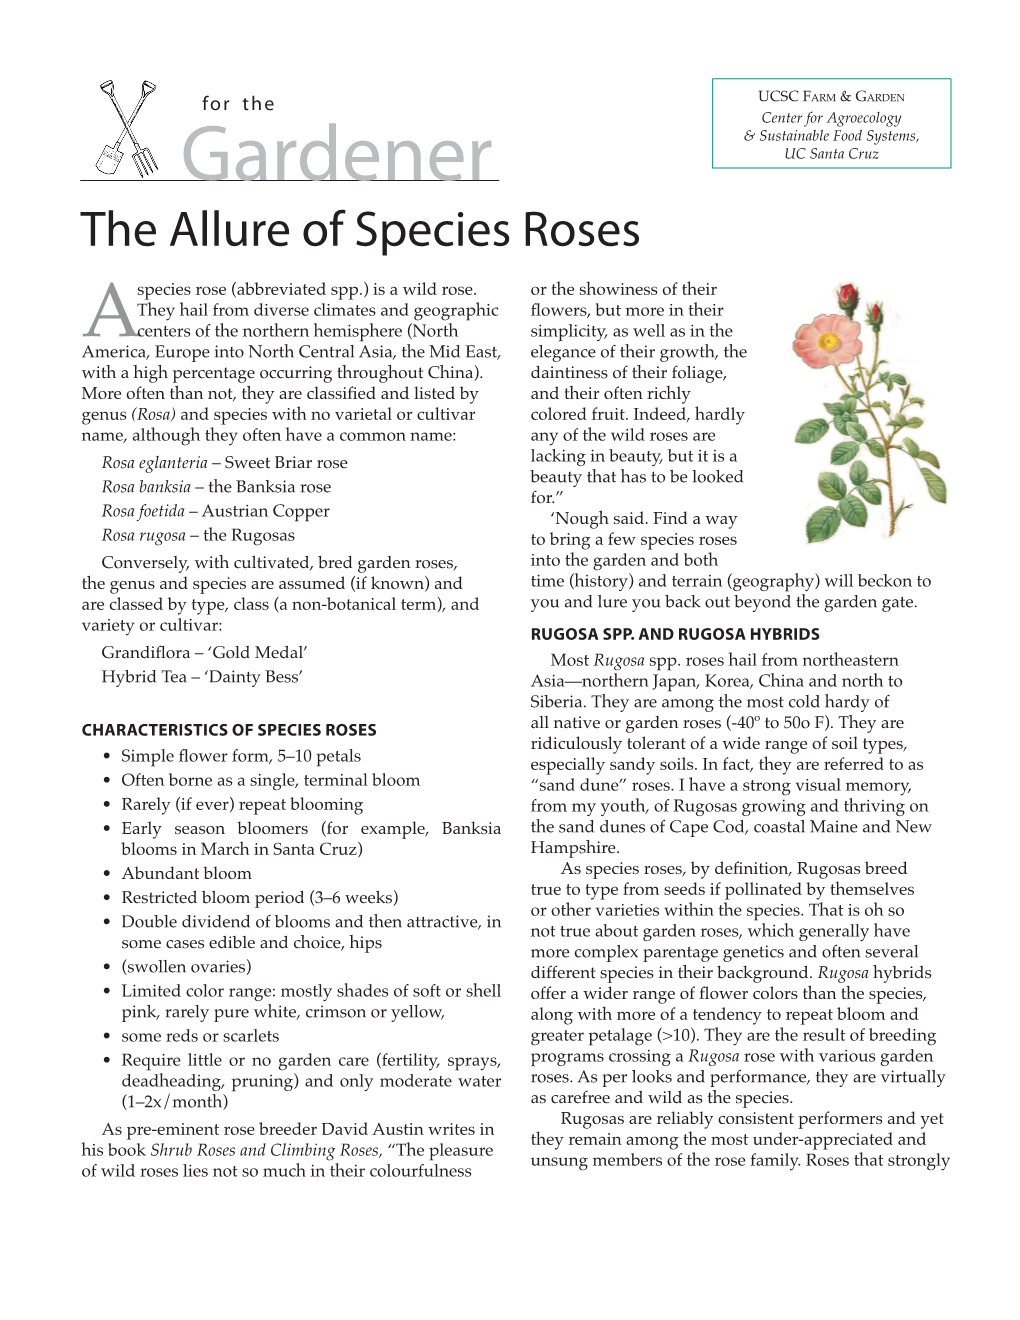 The Allure of Species Roses